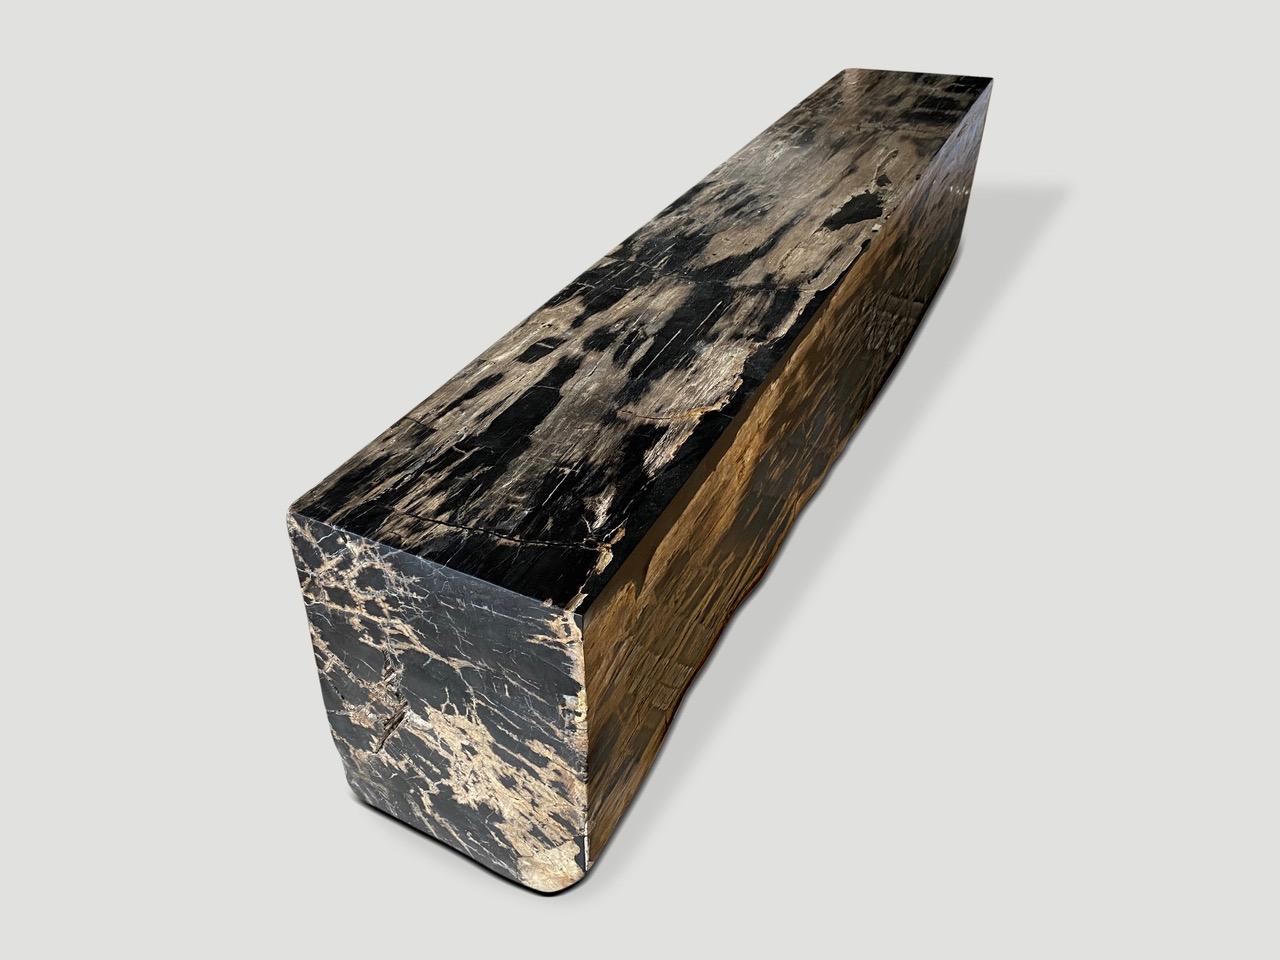 Beautiful long petrified wood bench. It’s fascinating how Mother Nature produces these exquisite 40 million year old petrified teak logs with such contrasting colors and natural markings throughout. Modern yet with so much history. Fabulous in a